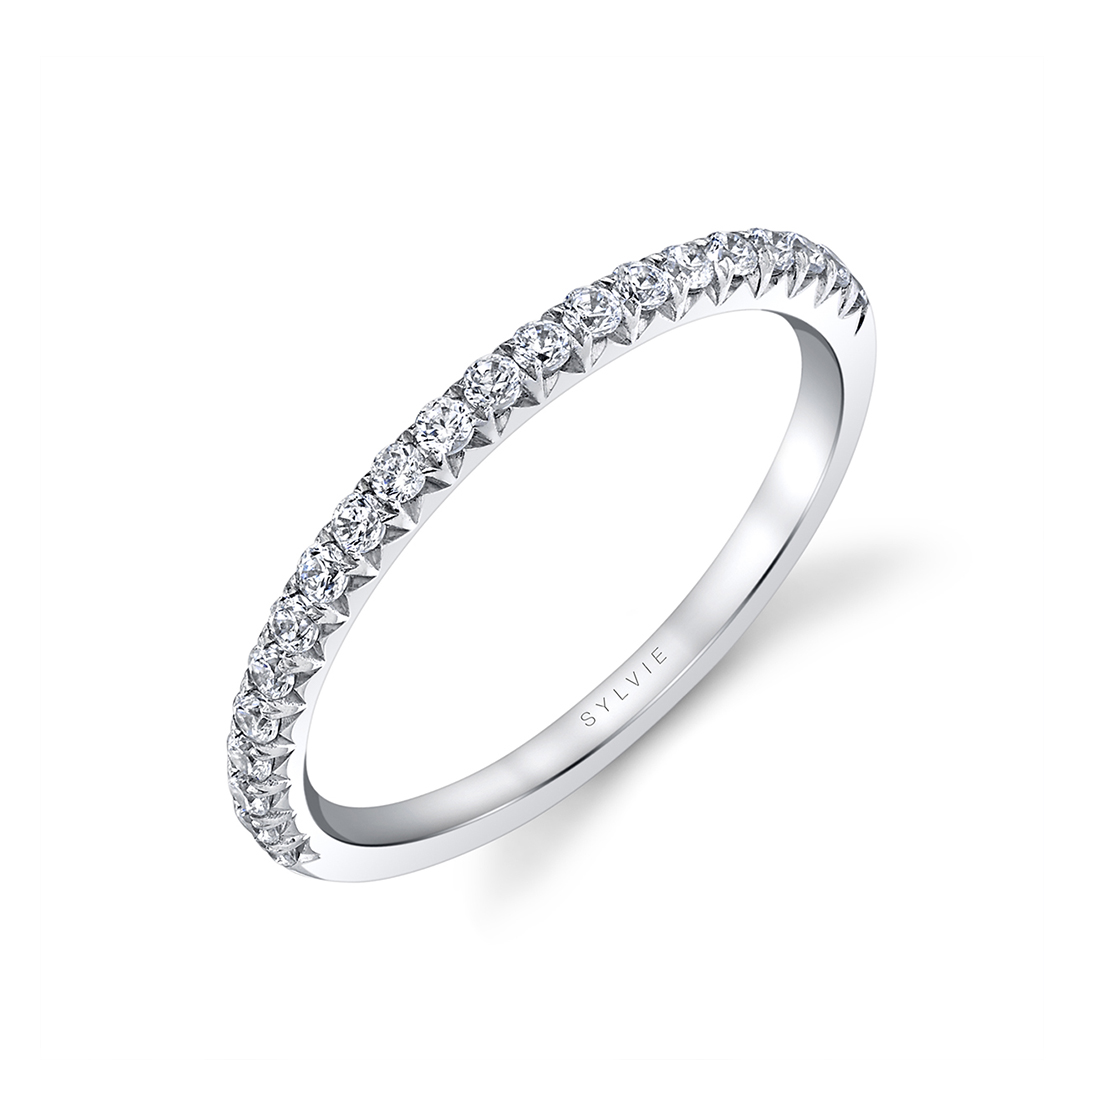 Shared Prong Wedding Band in White Gold